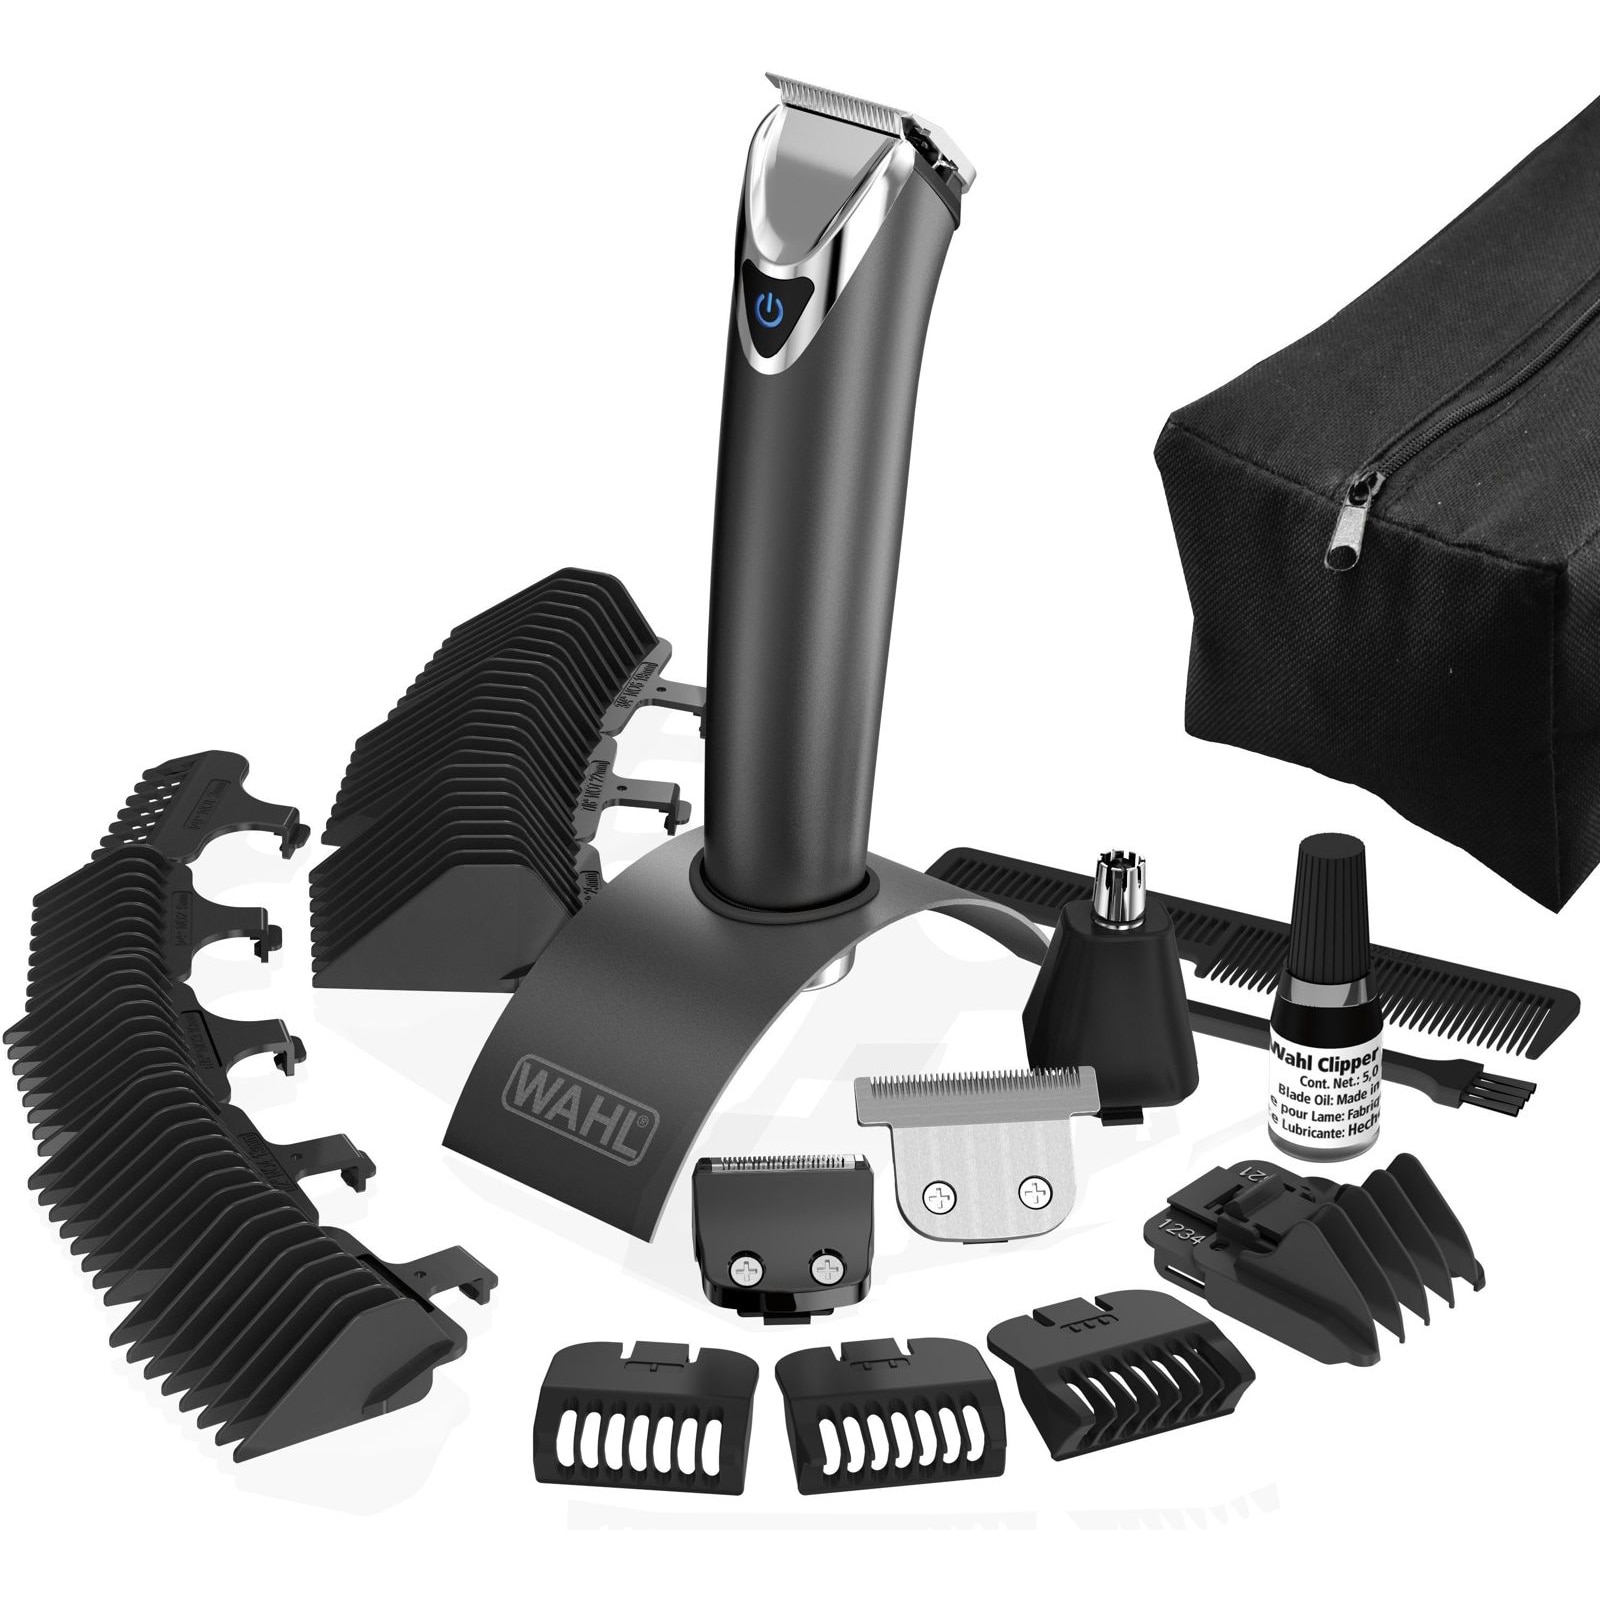 wahl stainless steel advanced